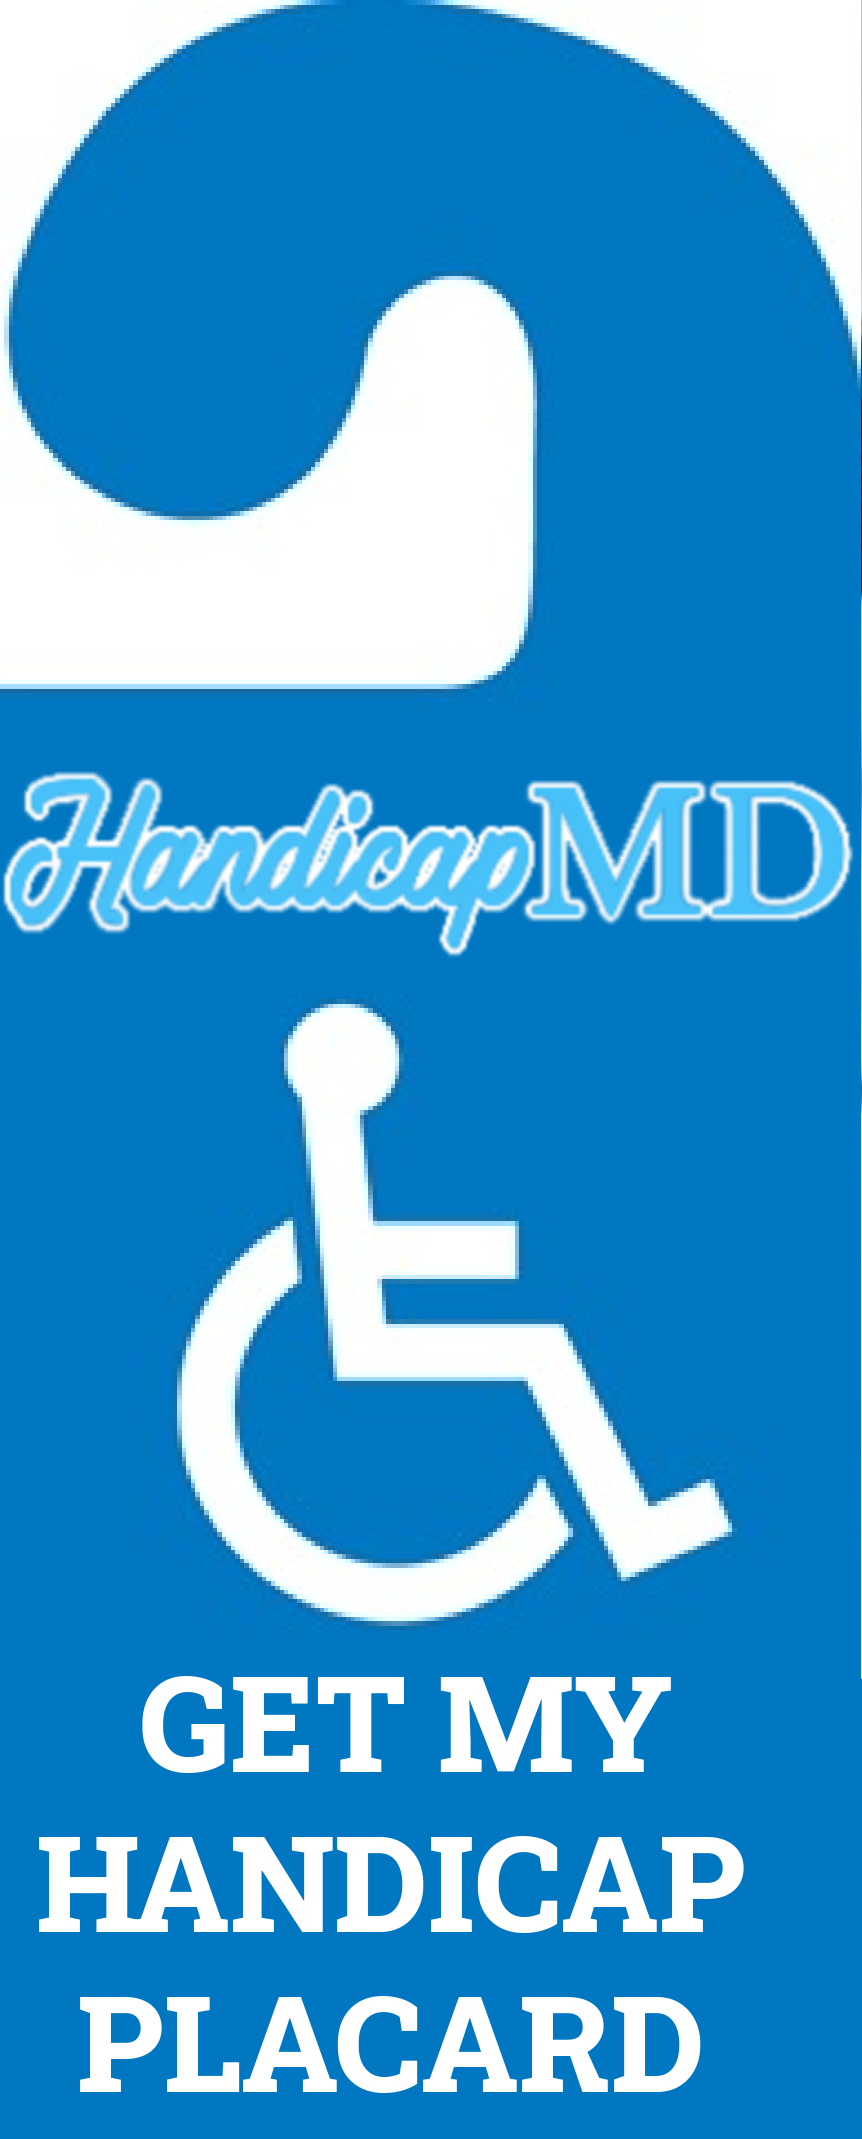 Disabled Parking Permit Renewal in Florida 